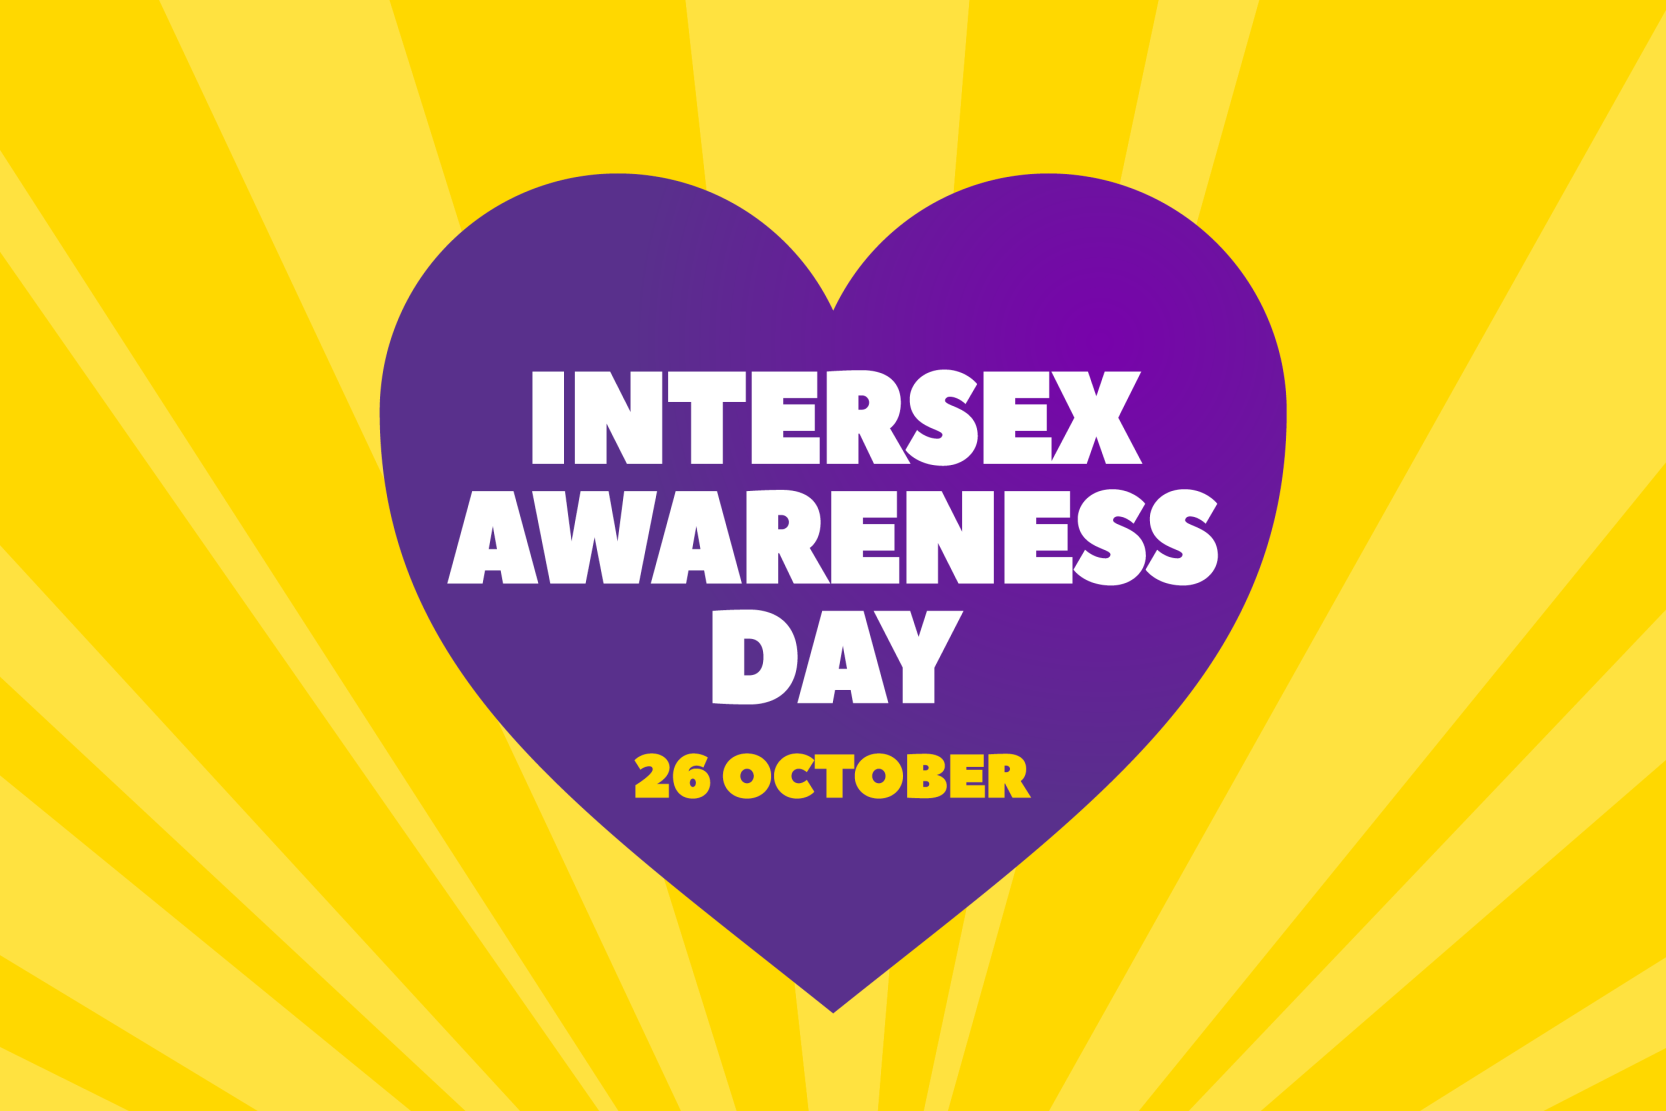 Purple love heart with the words "Intersex awareness day 26 October" in it